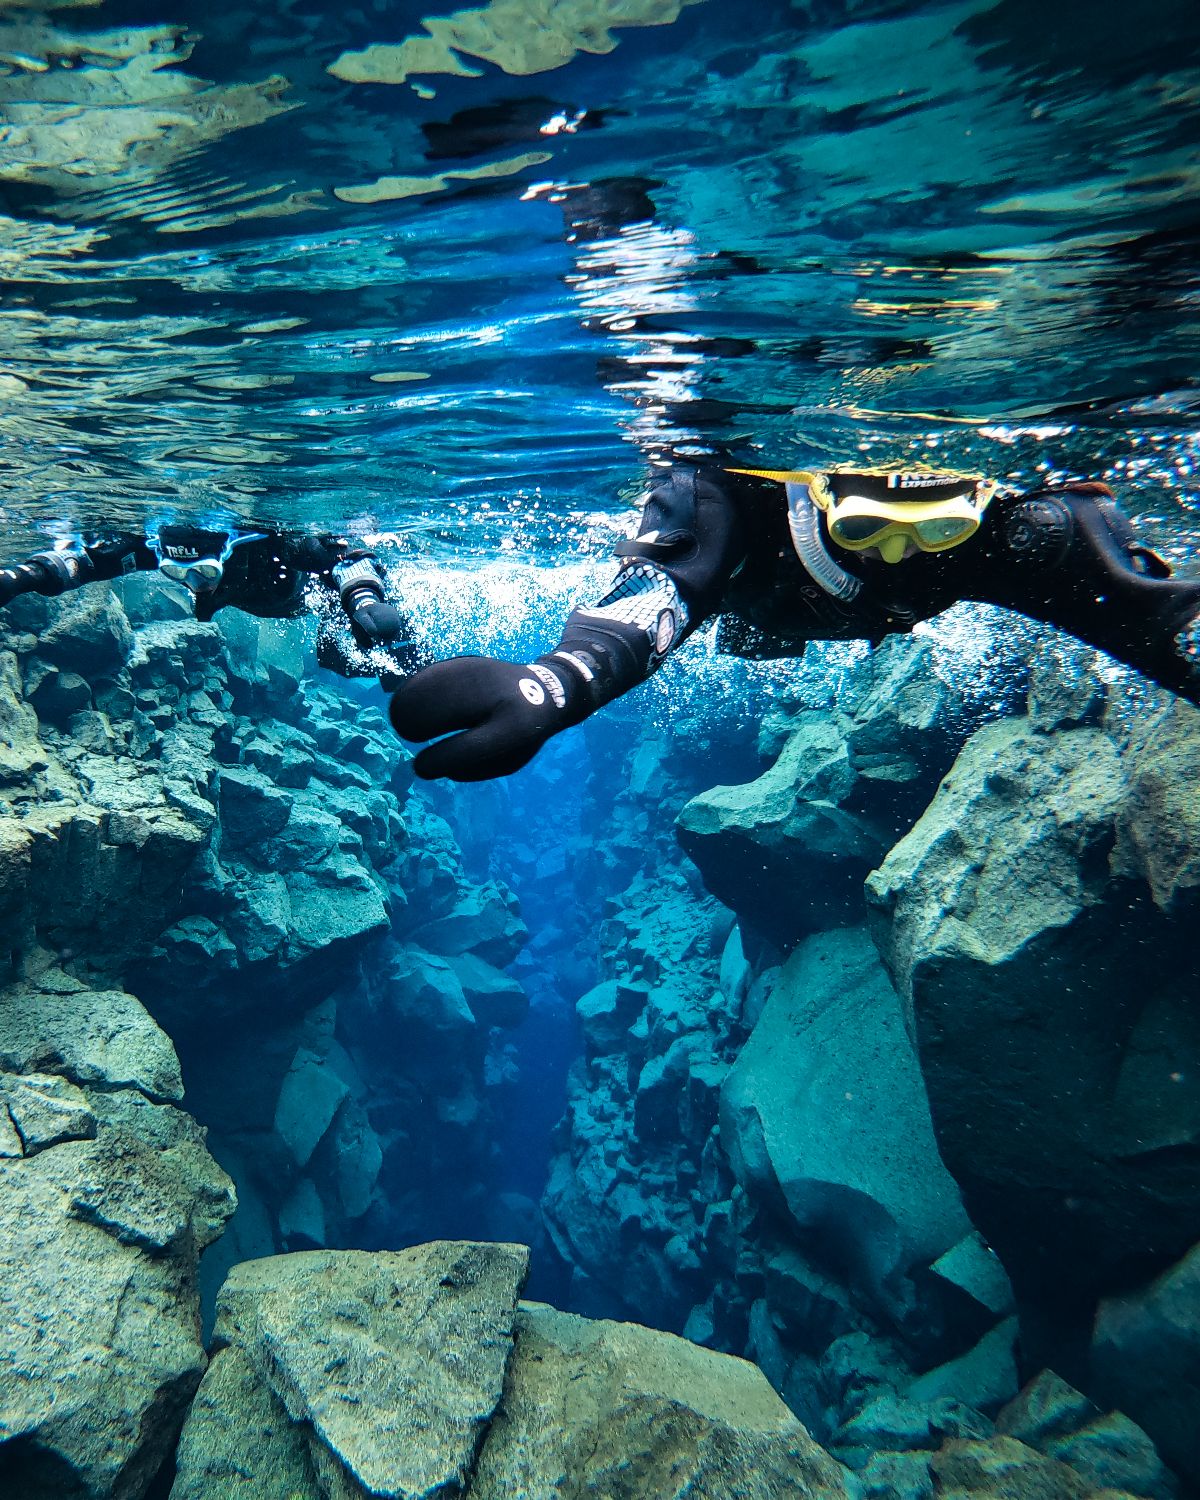 Snorkeling between Continents in Silfra: Snorkeling in Silfra is a transcontinental once-in-a-lifetime experience. The Trolls will show you what National Geographic has described as one of the top dive sites in the world in the historically rich Thingvellir National Park - part of the famous Golden Circle route.